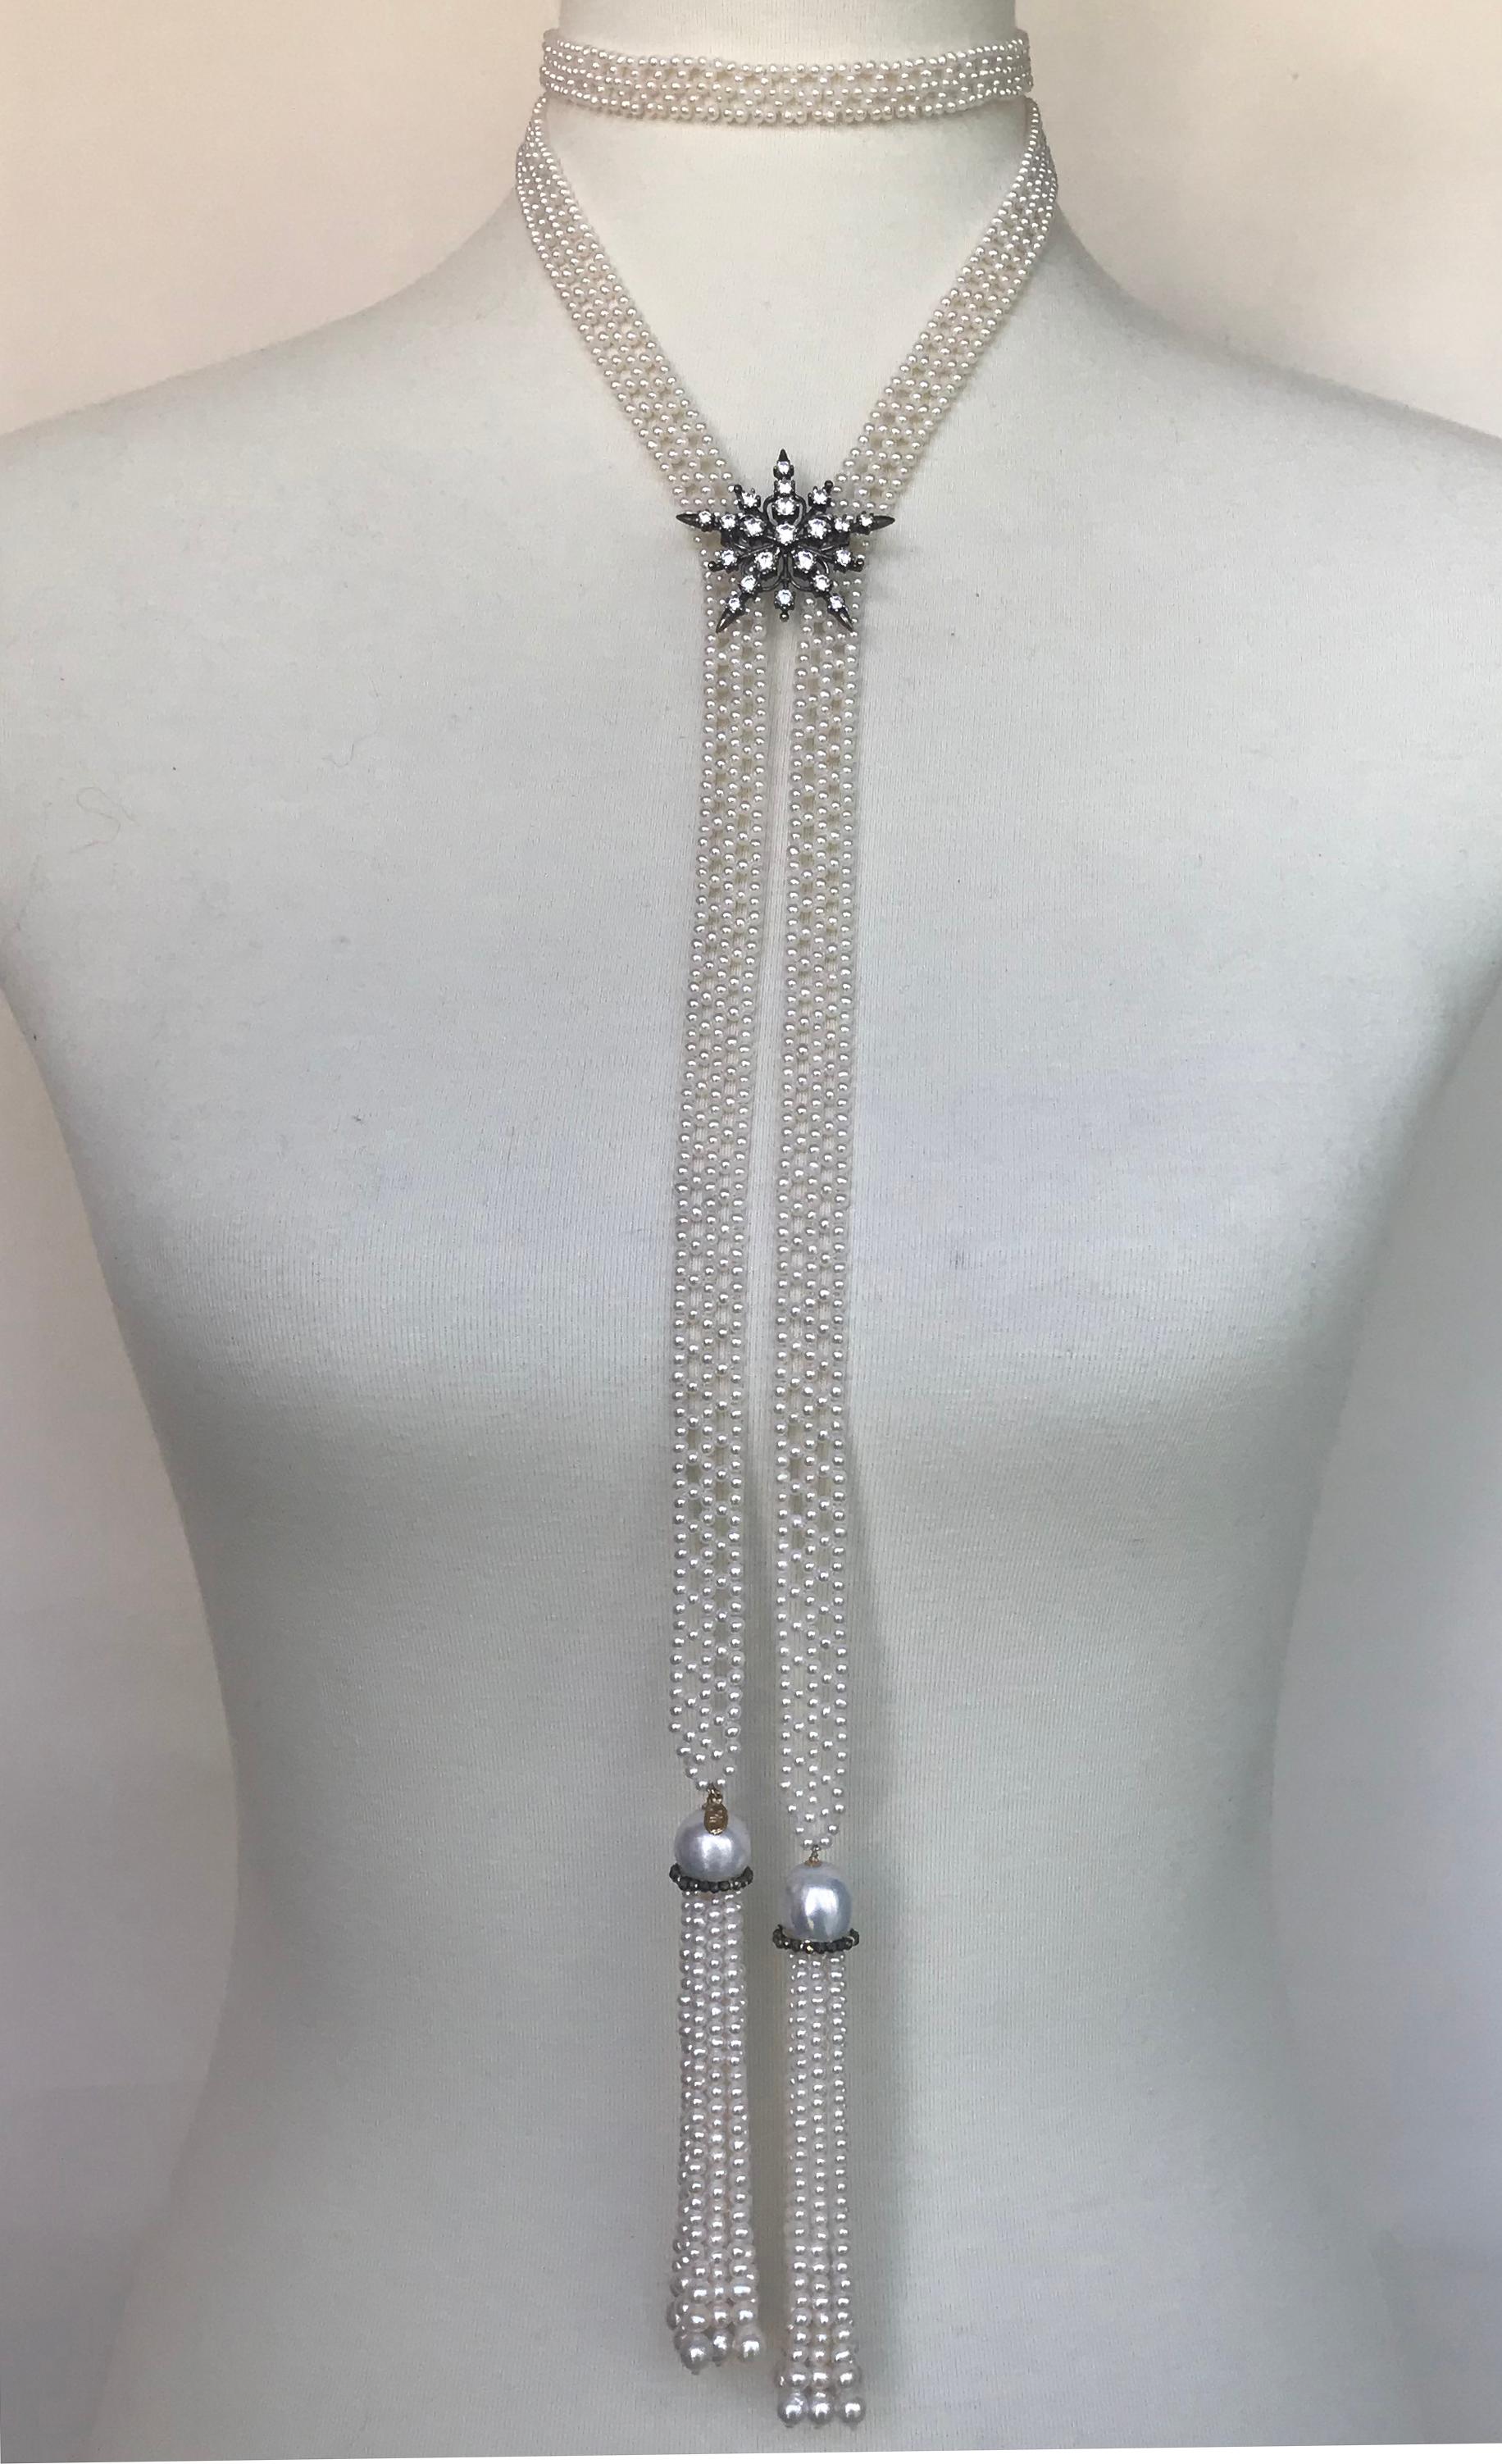 Marina J. Presents a classical and sophisticated woven white pearl sautoir, lace-like design, with baroque pearls and 14k yellow gold. The beautiful tassel has a large baroque pearl on top of a 14k yellow gold roundel with encrusted black spinel